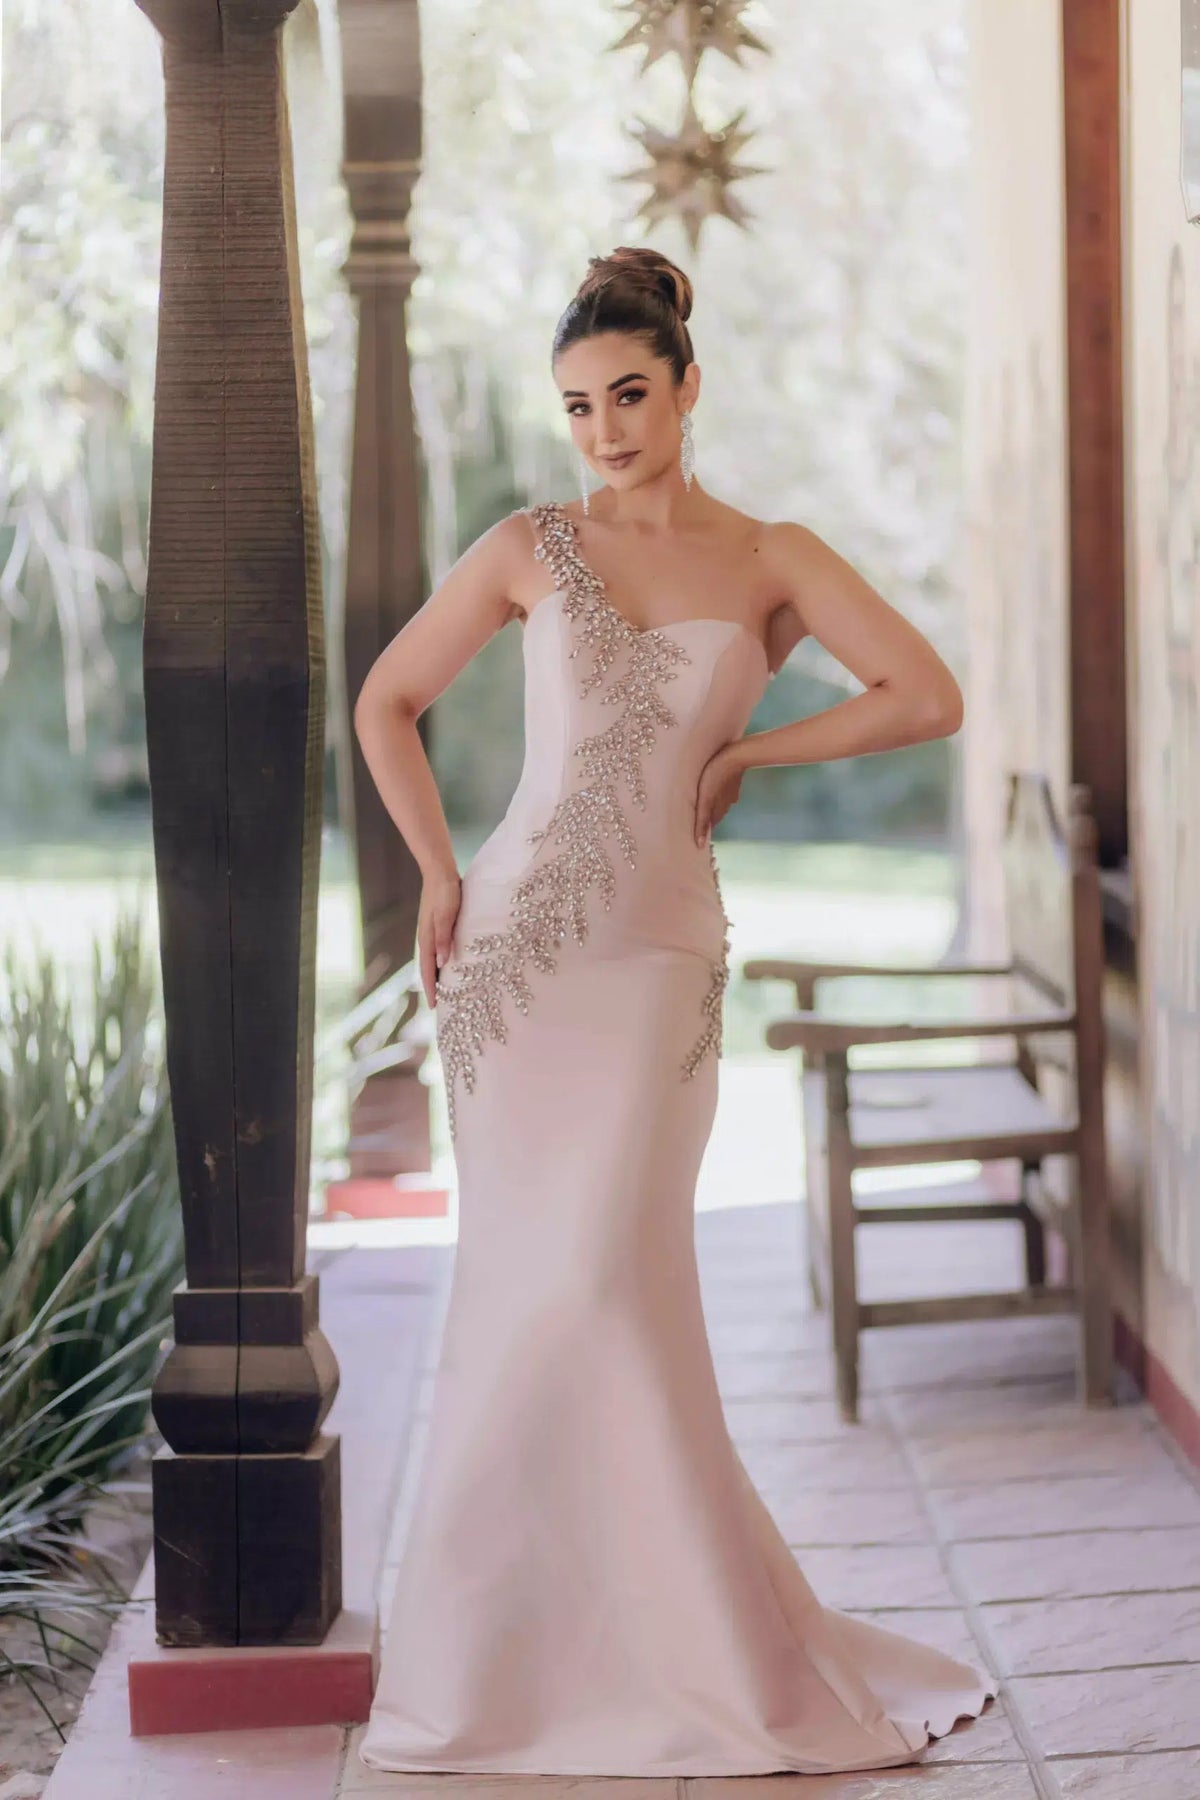 Terani Couture Style 232E1231 Mikado Evening Dress - Sleeveless sheath silhouette with intricate beaded embroidery, perfect for special occasions and for the Mother of the Bride or Groom.  Available at both Madeline's Boutique locations in Toronto, Canada and Boca Raton, Florida.